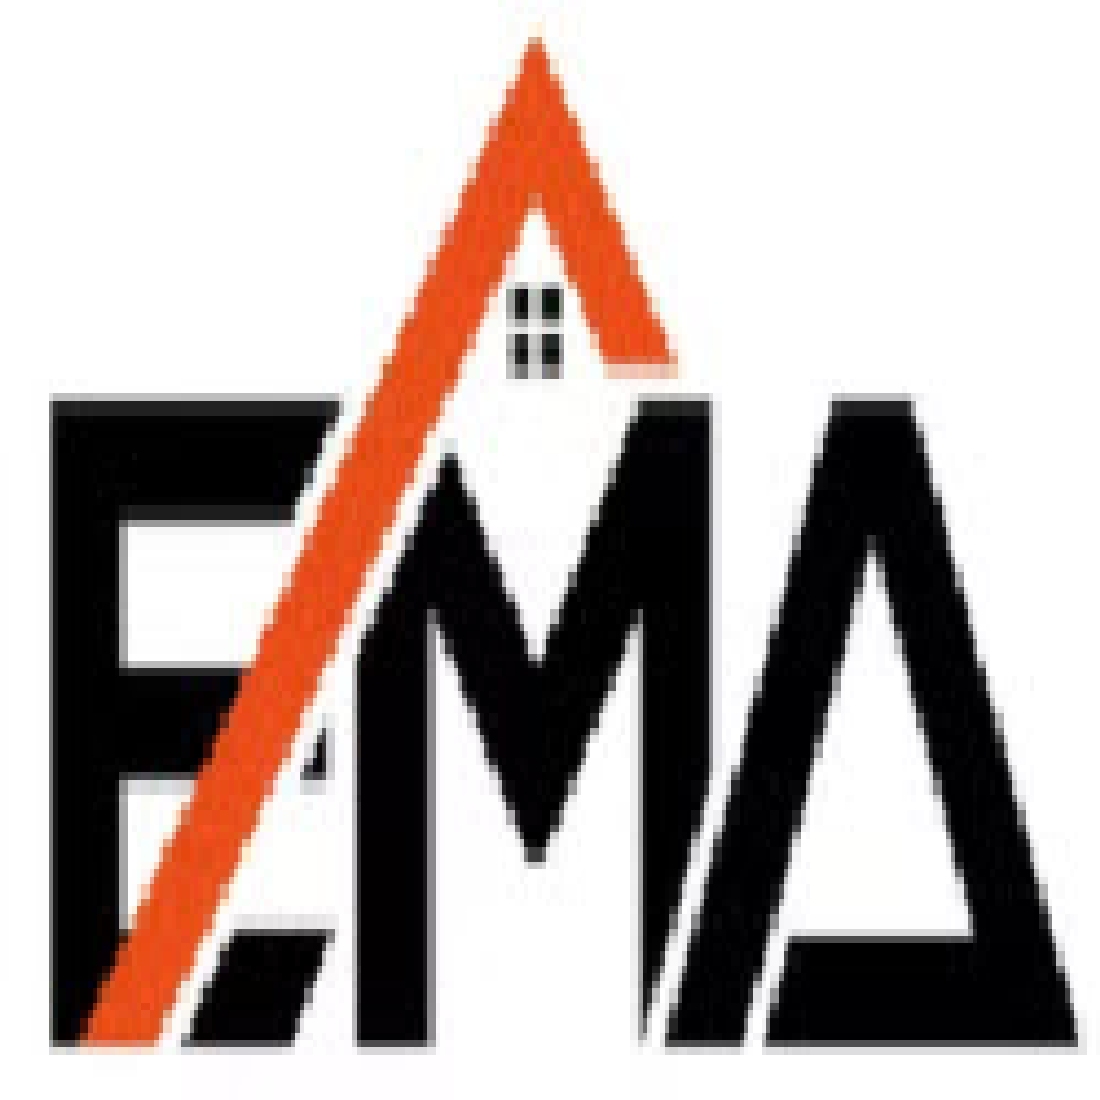 EMA Structural Engineers, Milestone Inspections Orlando, Milestone Inspections Daytona, Condo Milestone Inspections Tampa, Condo Inspections Sarasota, Structural Engineers Florida, Milestone Inspections Palm Beach, Corrosion Mapping, Corrosion Inspection, Forensic Engineers Palm Beach, Structural Engineers Daytona Beach, Structural Inspections Tampa